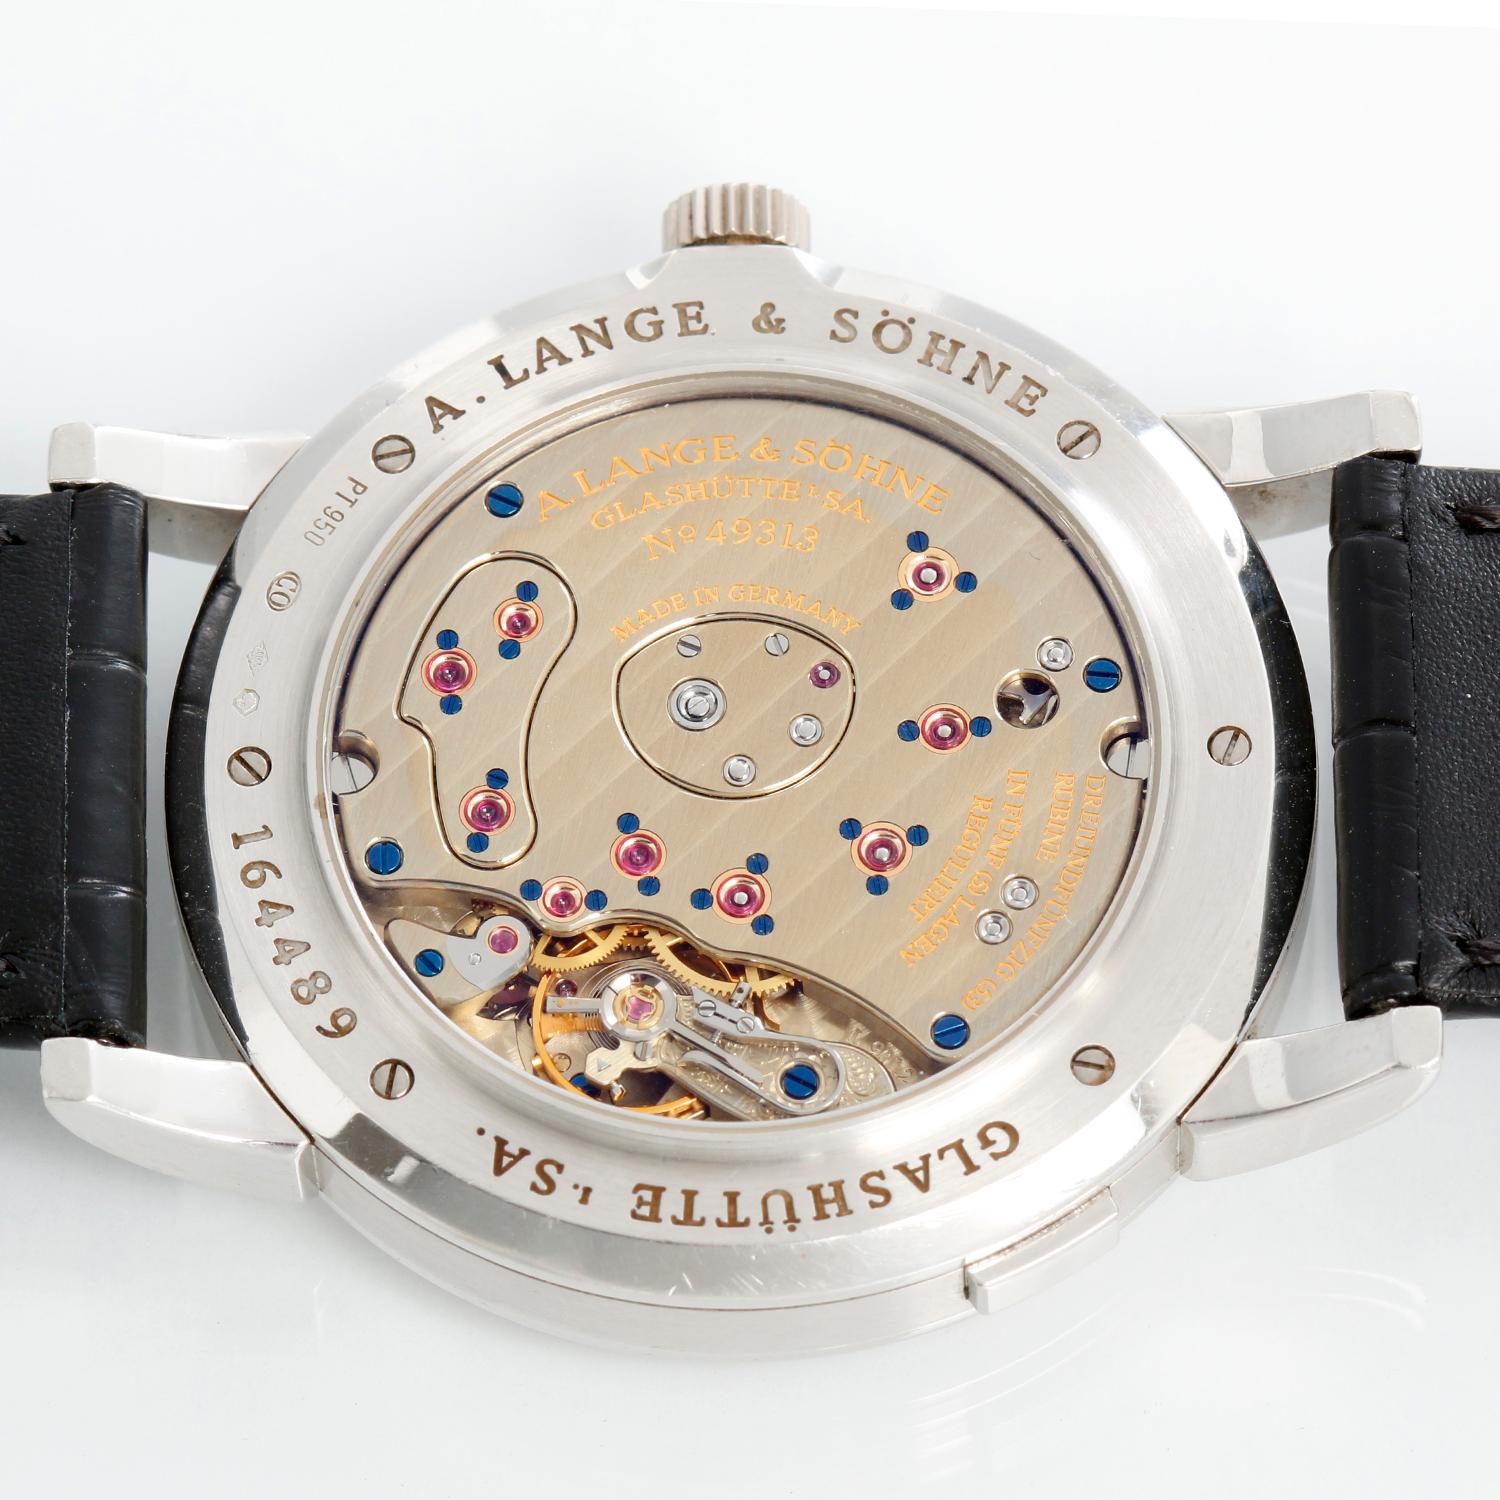 A. Lange & Sohne Grande Lange 1 Platinum Men's Power Reserve Big Date Watch 115.025 - Manual winding. Platinum case with exposition back (42mm diameter). Two-tone gold/silver with offset time dial with Roman numerals; subseconds, power reserve